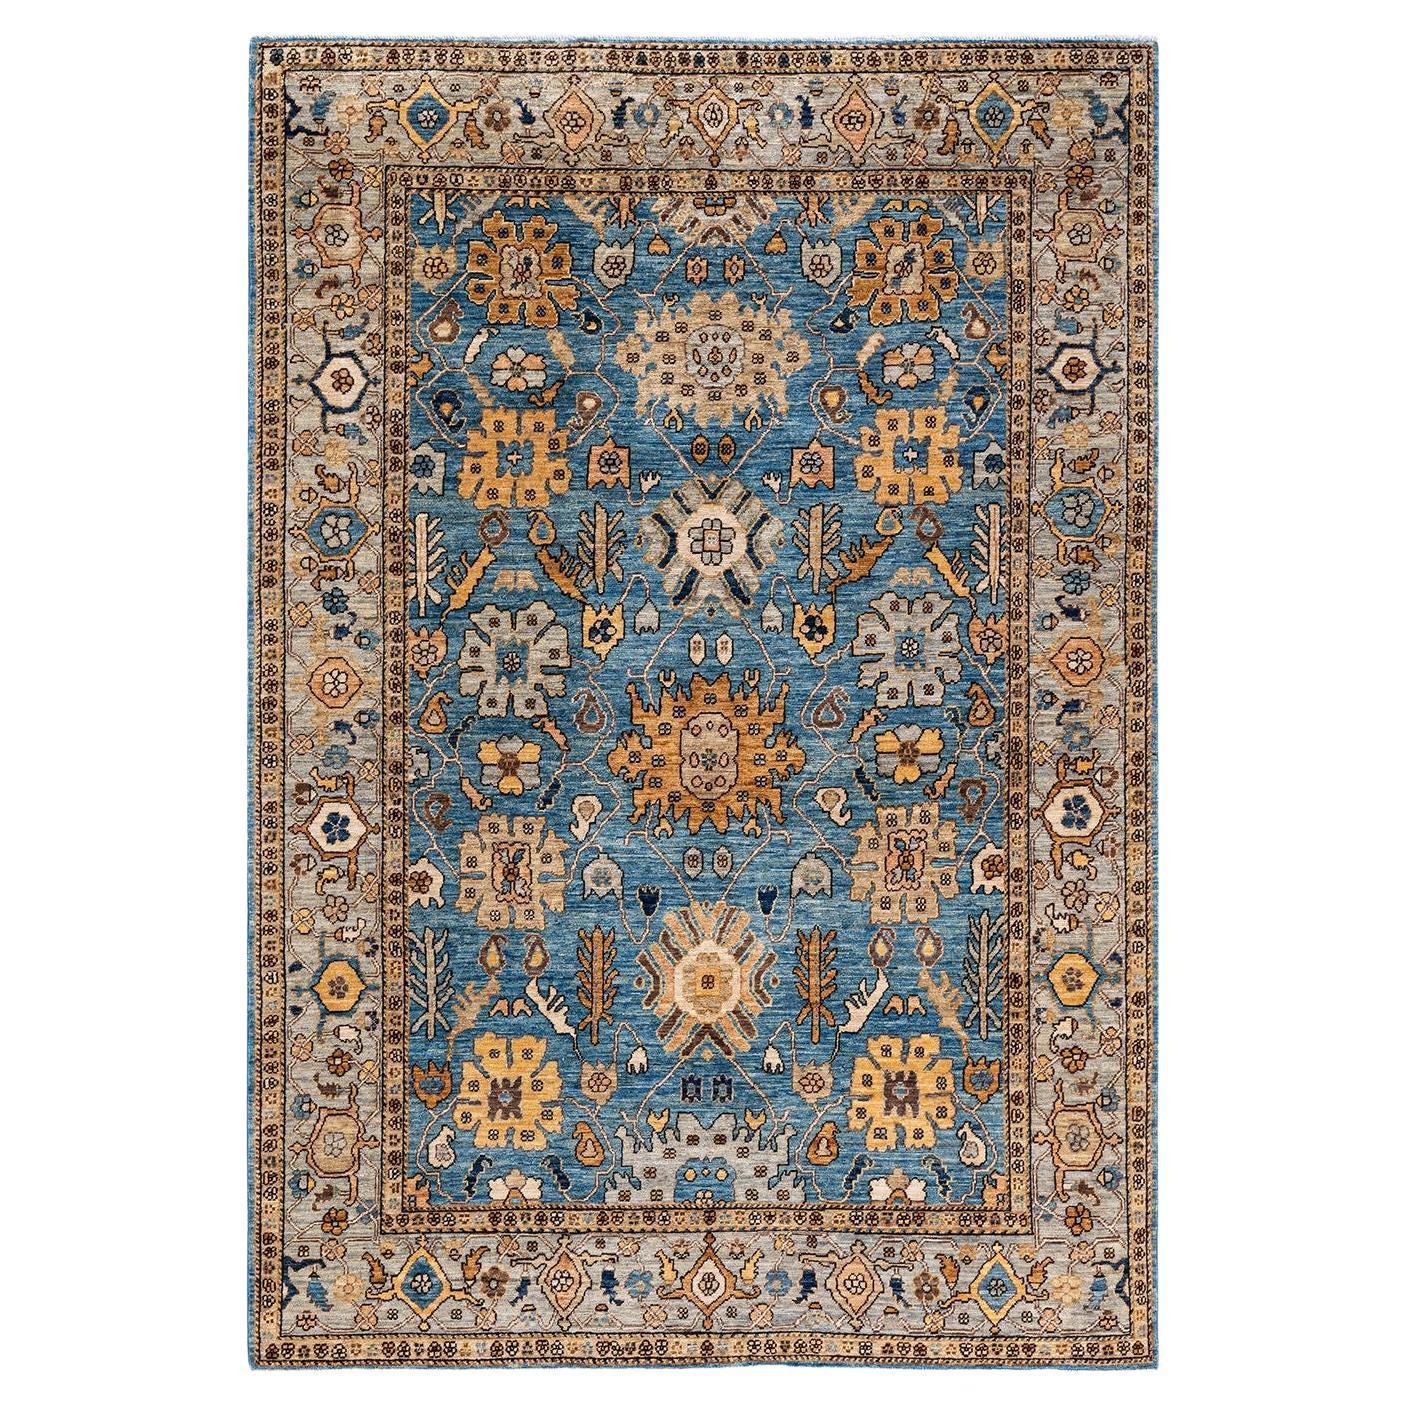 Serapi, One-of-a-kind hand knotted Runner Rug, Light Blue